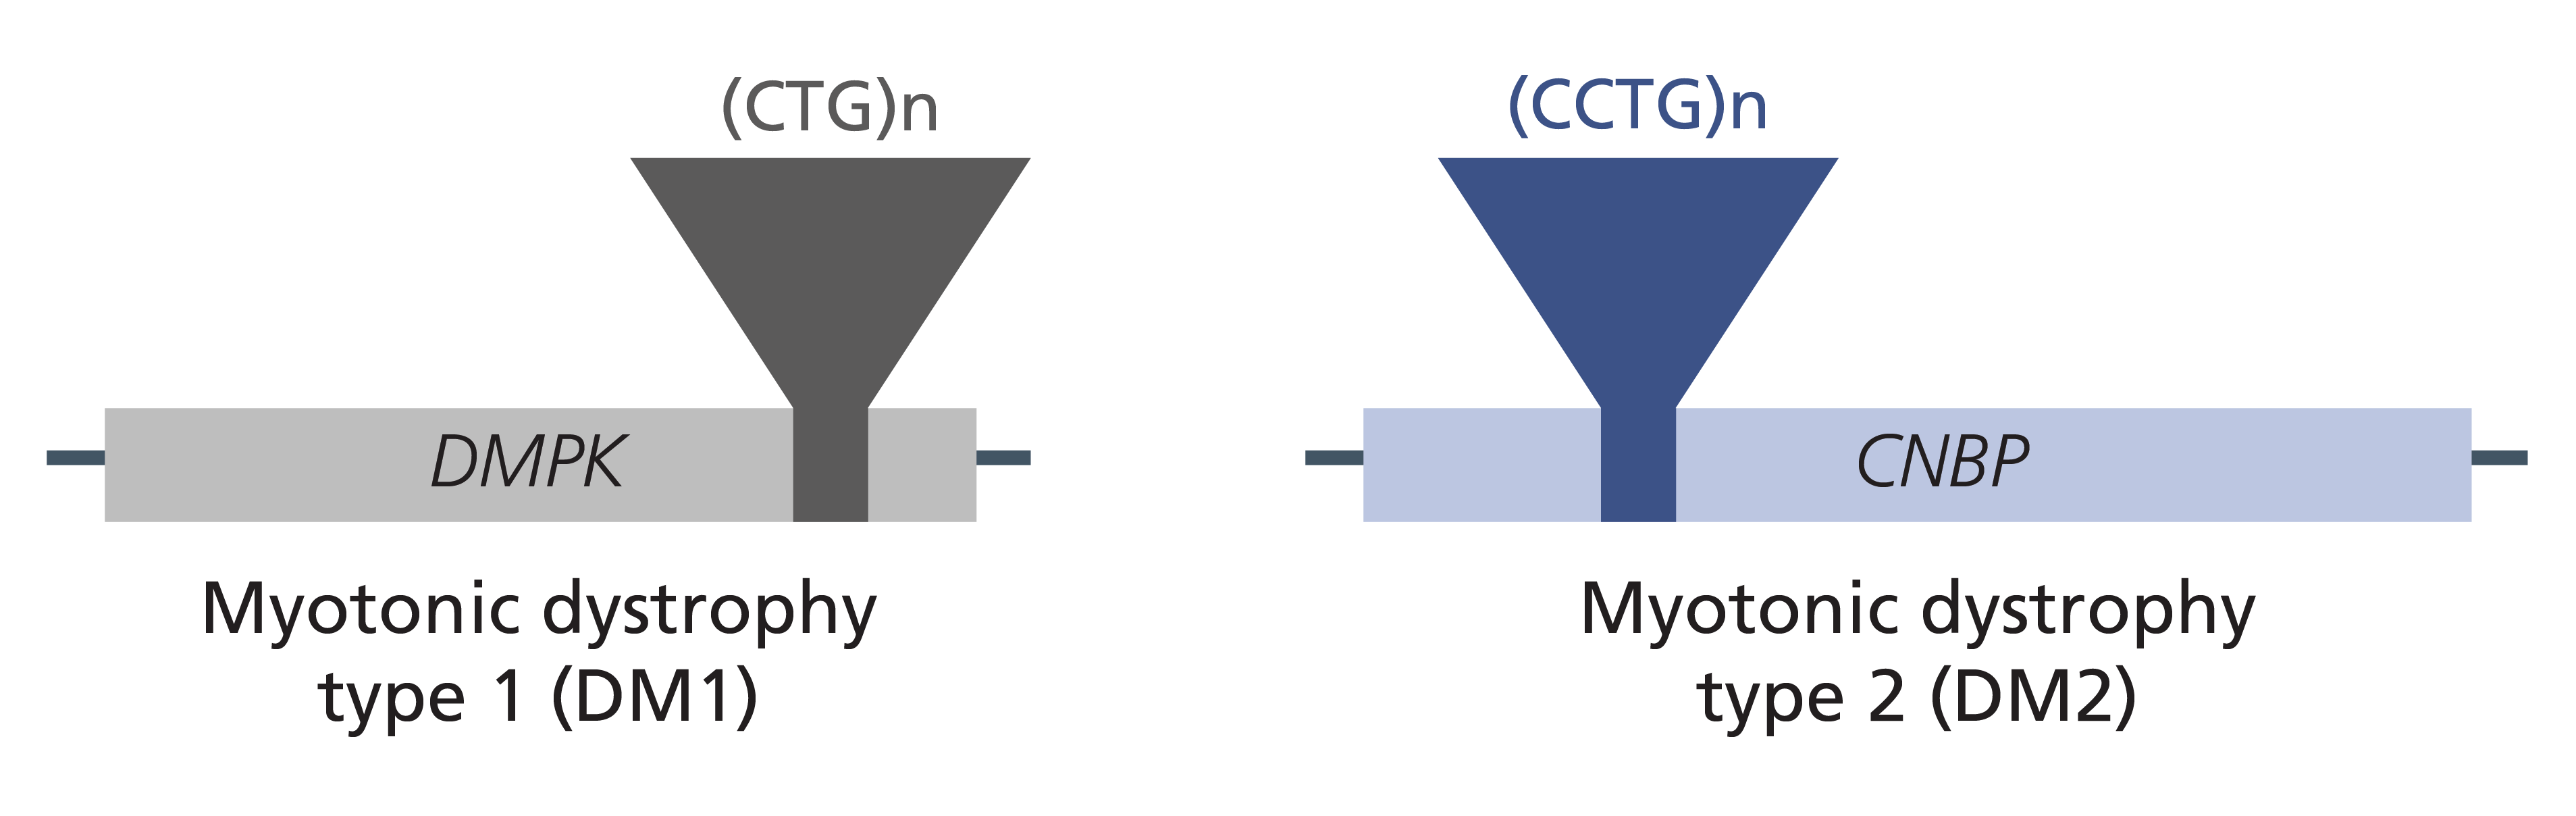 DM1 is caused by an abnormal number of CTG repeats in the DMPK gene, and DM2 by an abnormal number of CCTG repeats in the CNBP gene.